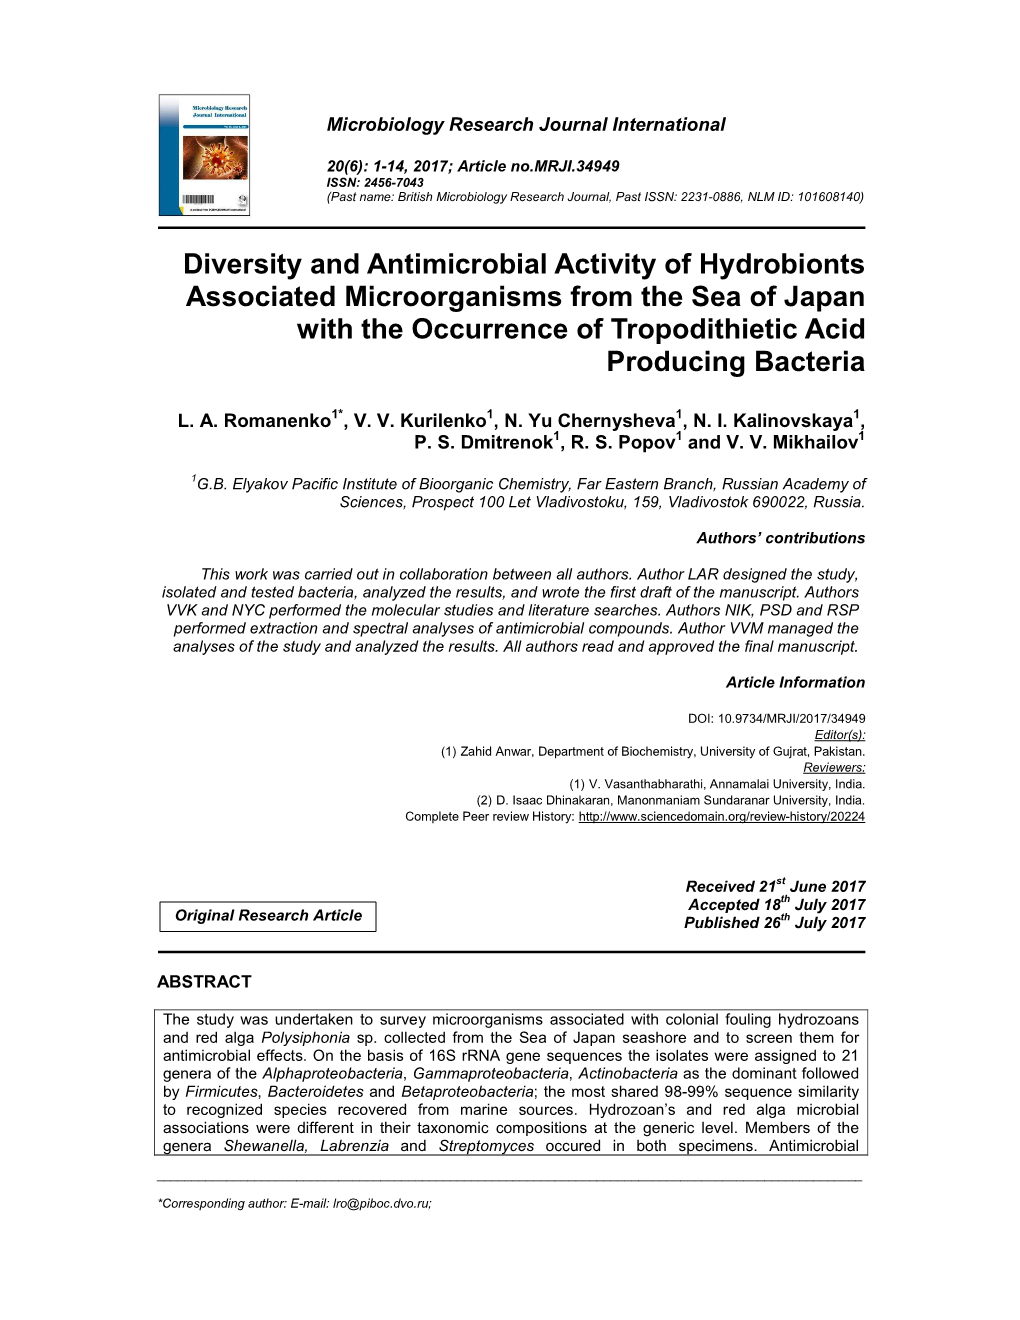 Diversity and Antimicrobial Activity of Hydrobionts Associated Microorganisms from the Sea of Japan with the Occurrence of Tropodithietic Acid Producing Bacteria